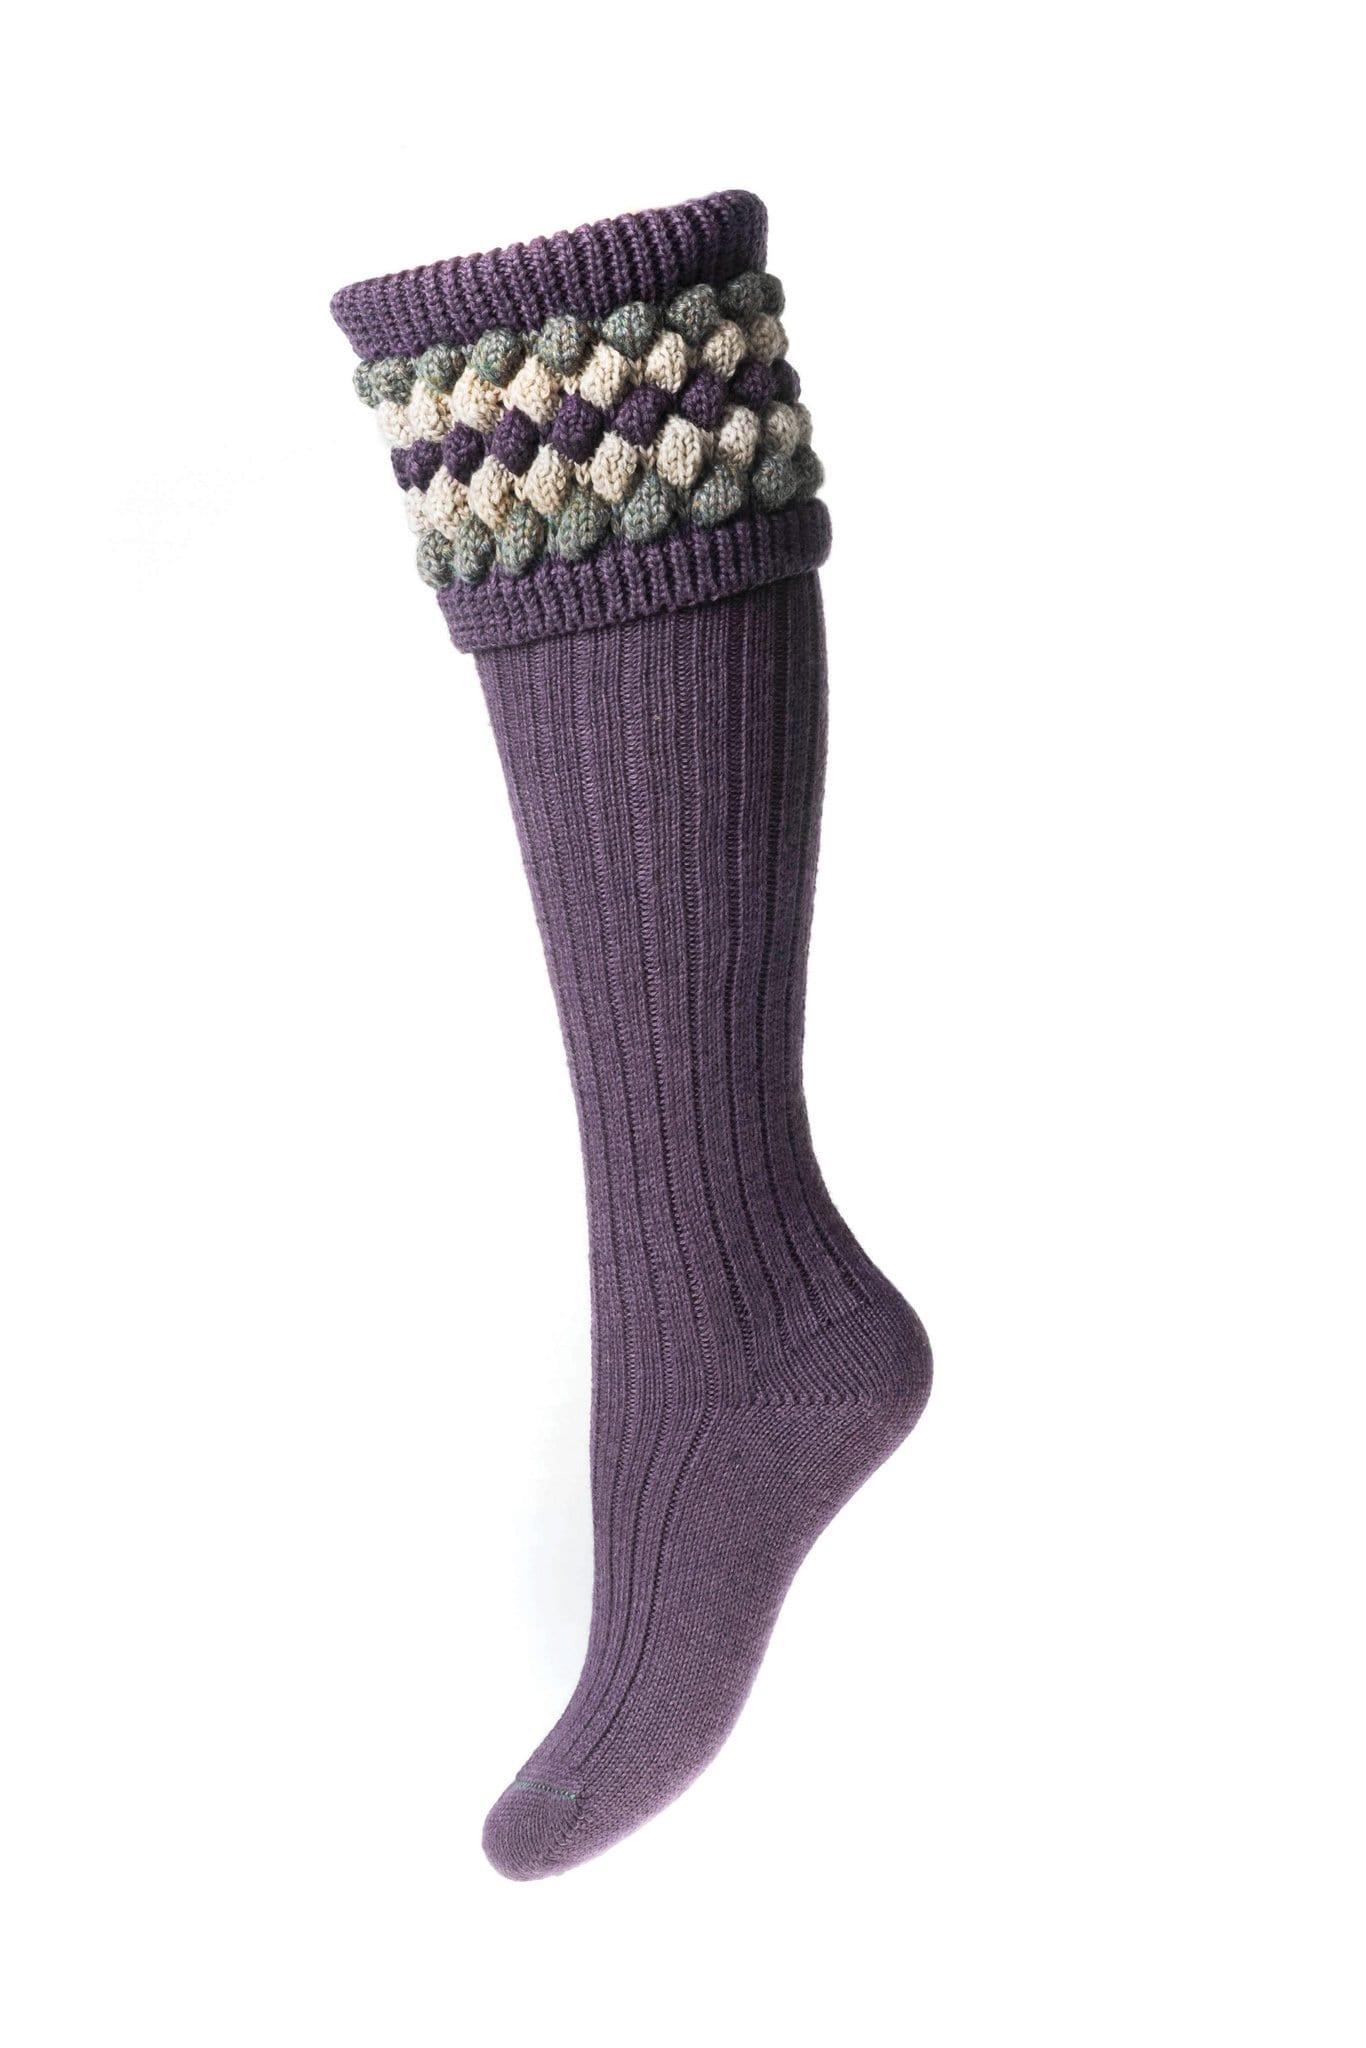 House of Cheviot Socks House of Cheviot Lady Angus Ladies Shooting Socks in Thistle